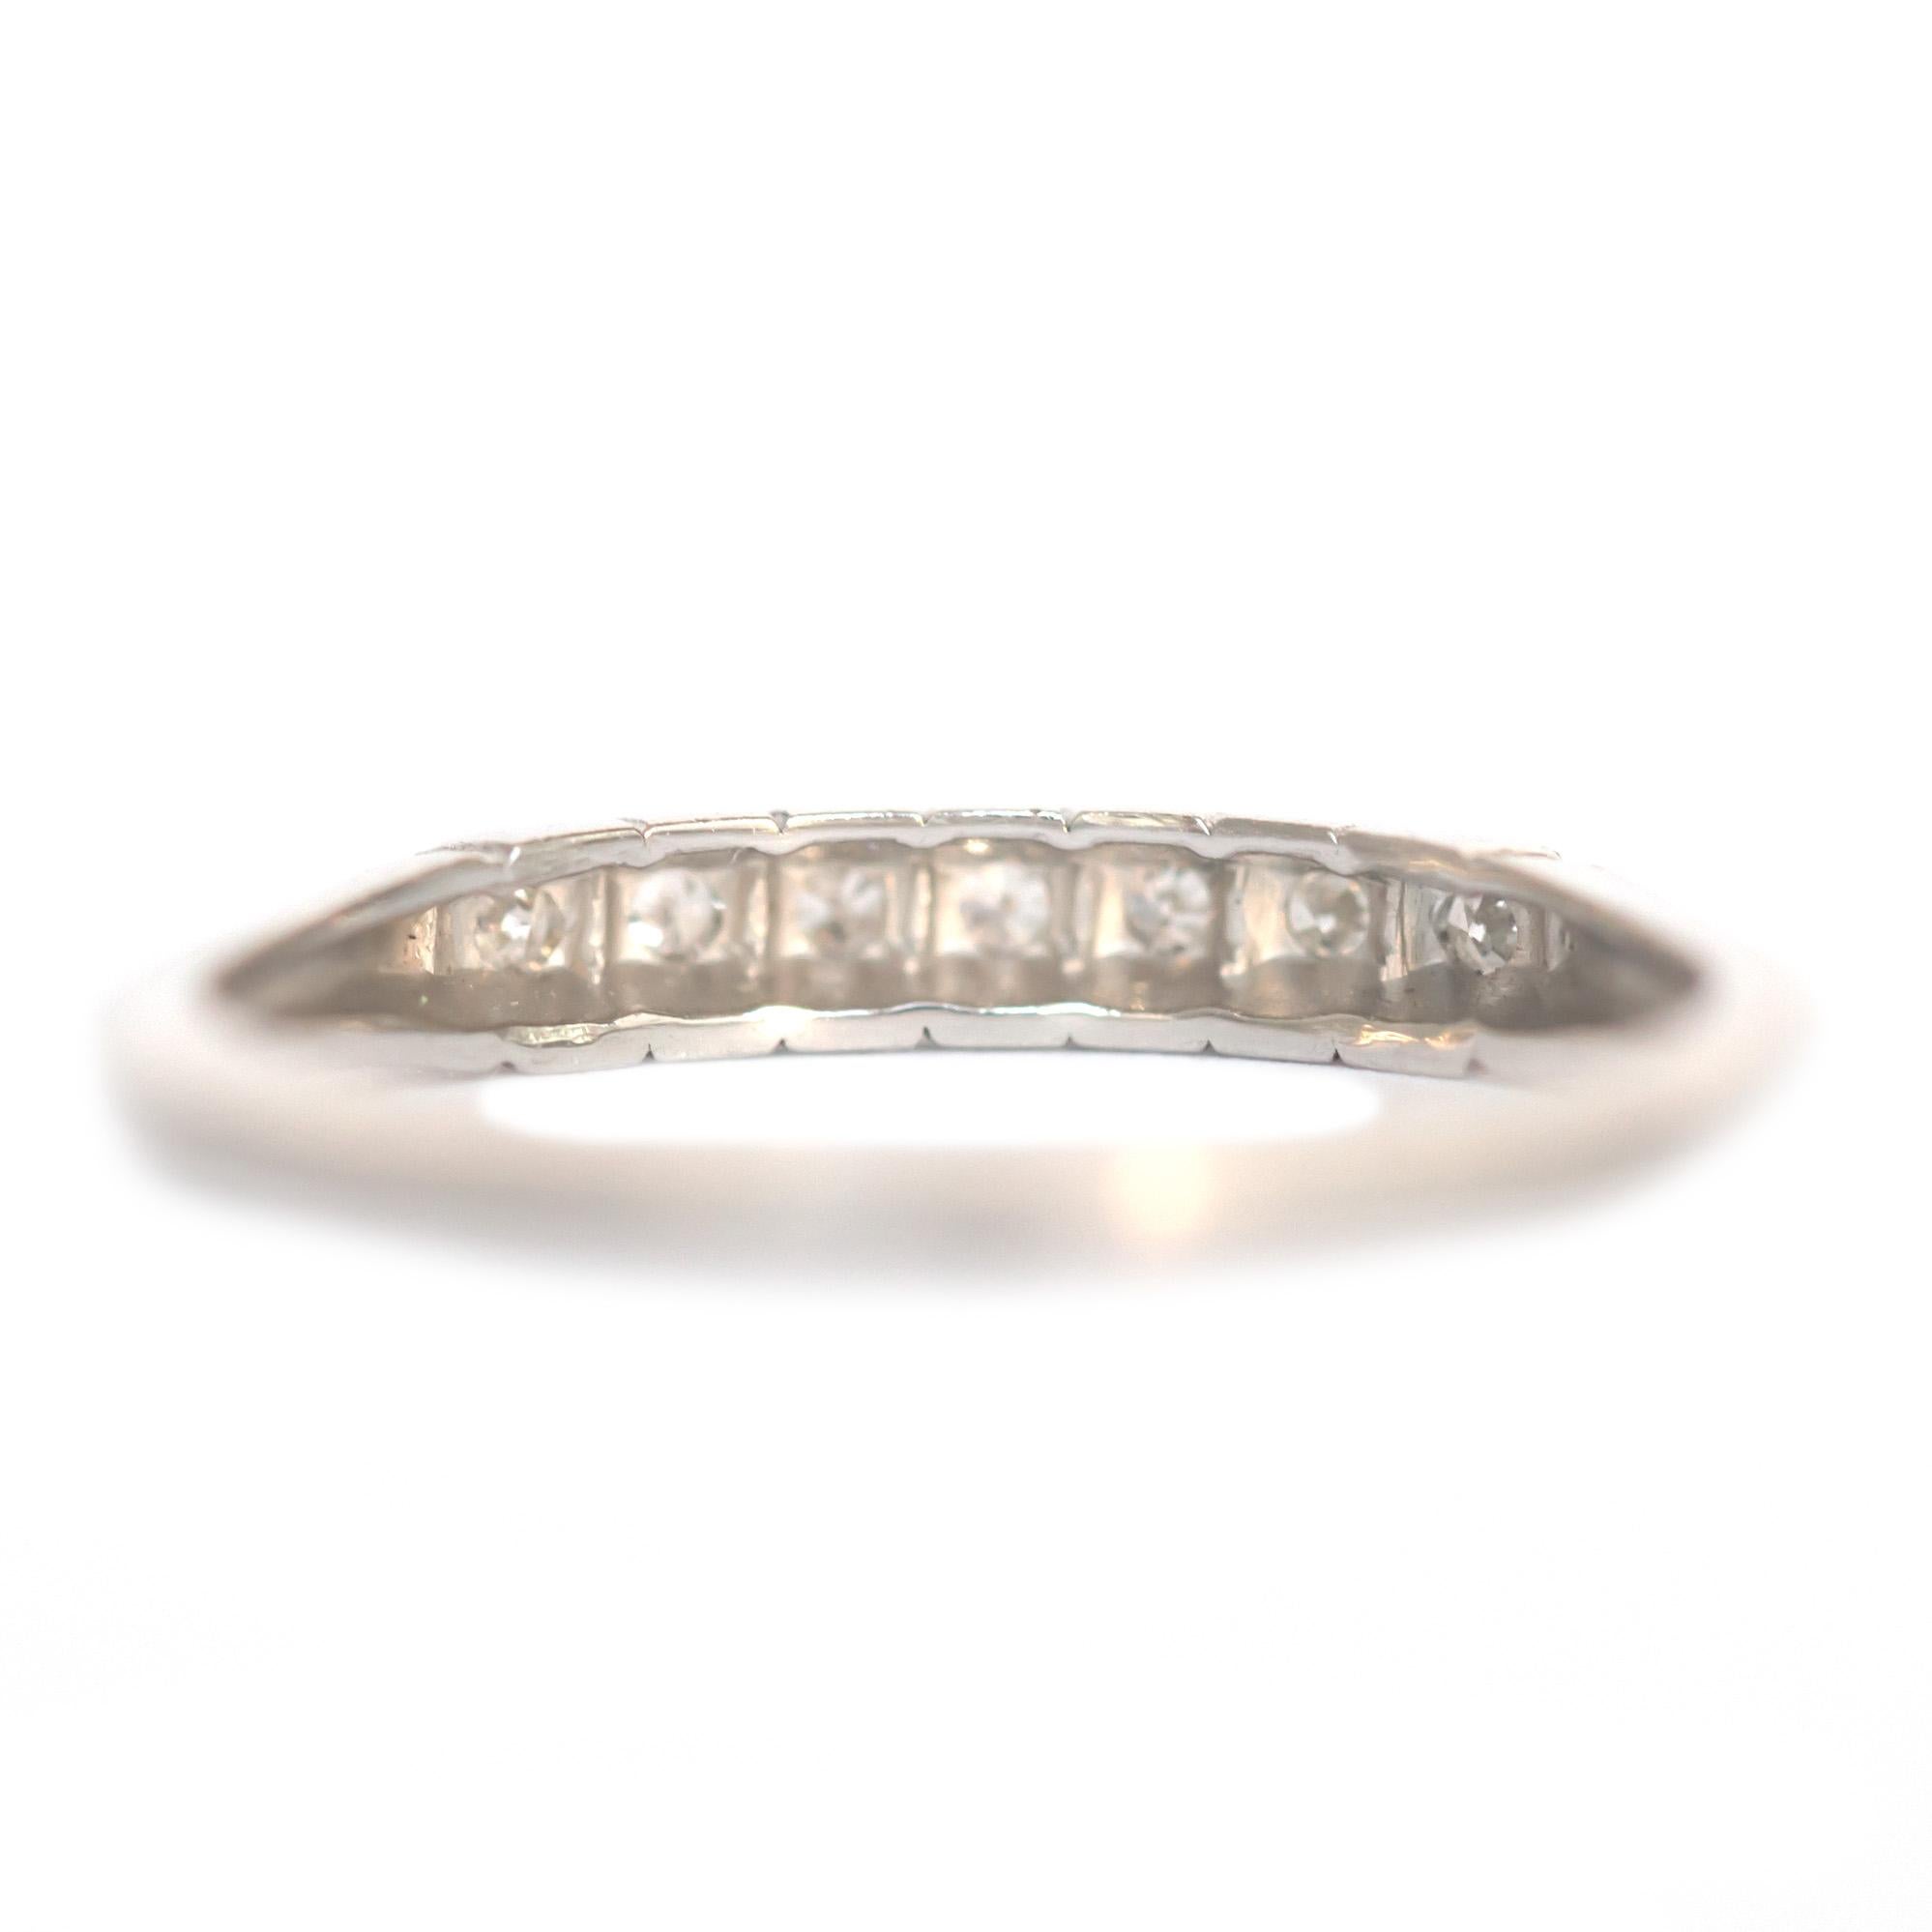 .15 Carat Total Weight Diamond Platinum Wedding Band In Good Condition For Sale In Atlanta, GA